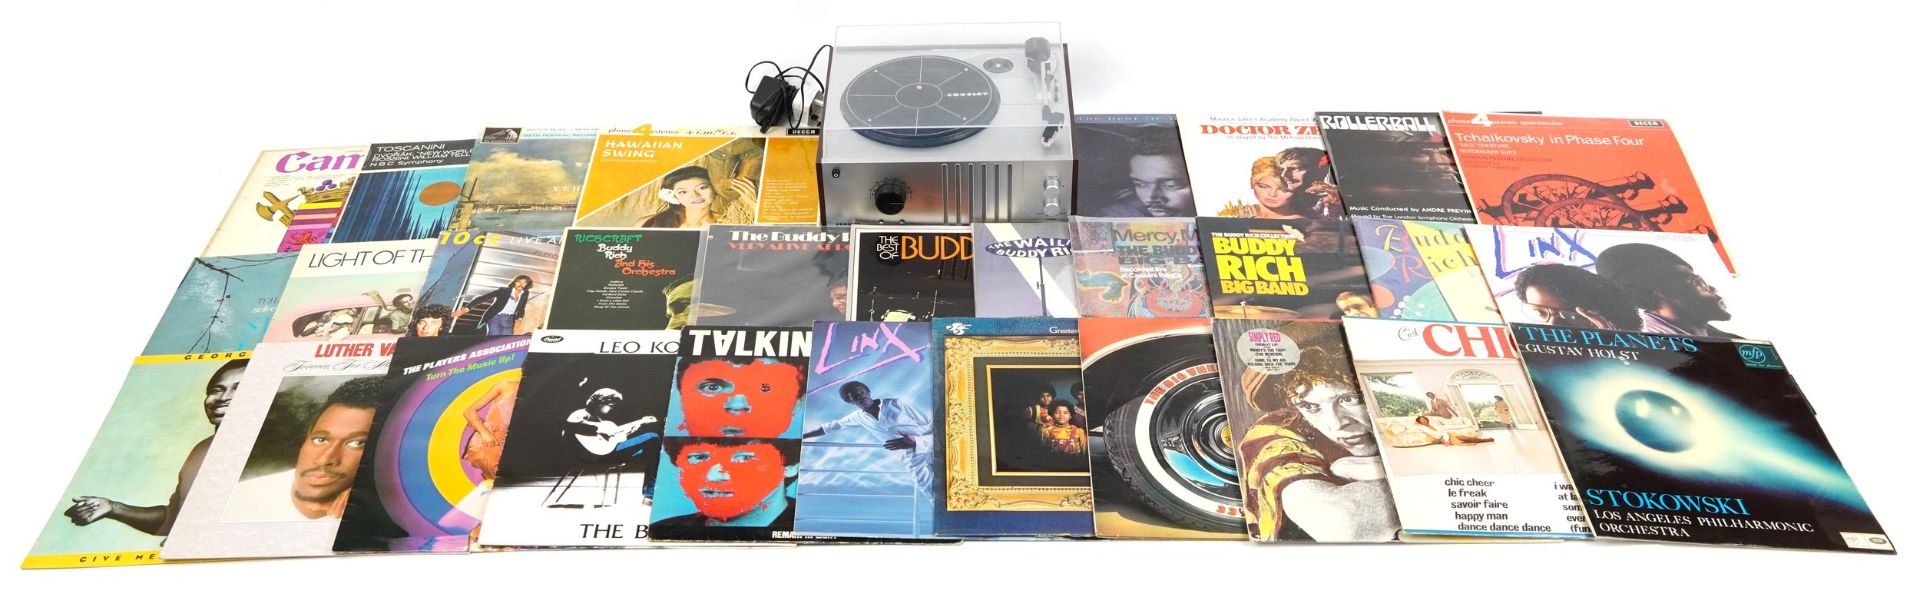 Crossley CR6017A record player with a collection of vinyl LP records including Talking Heads,